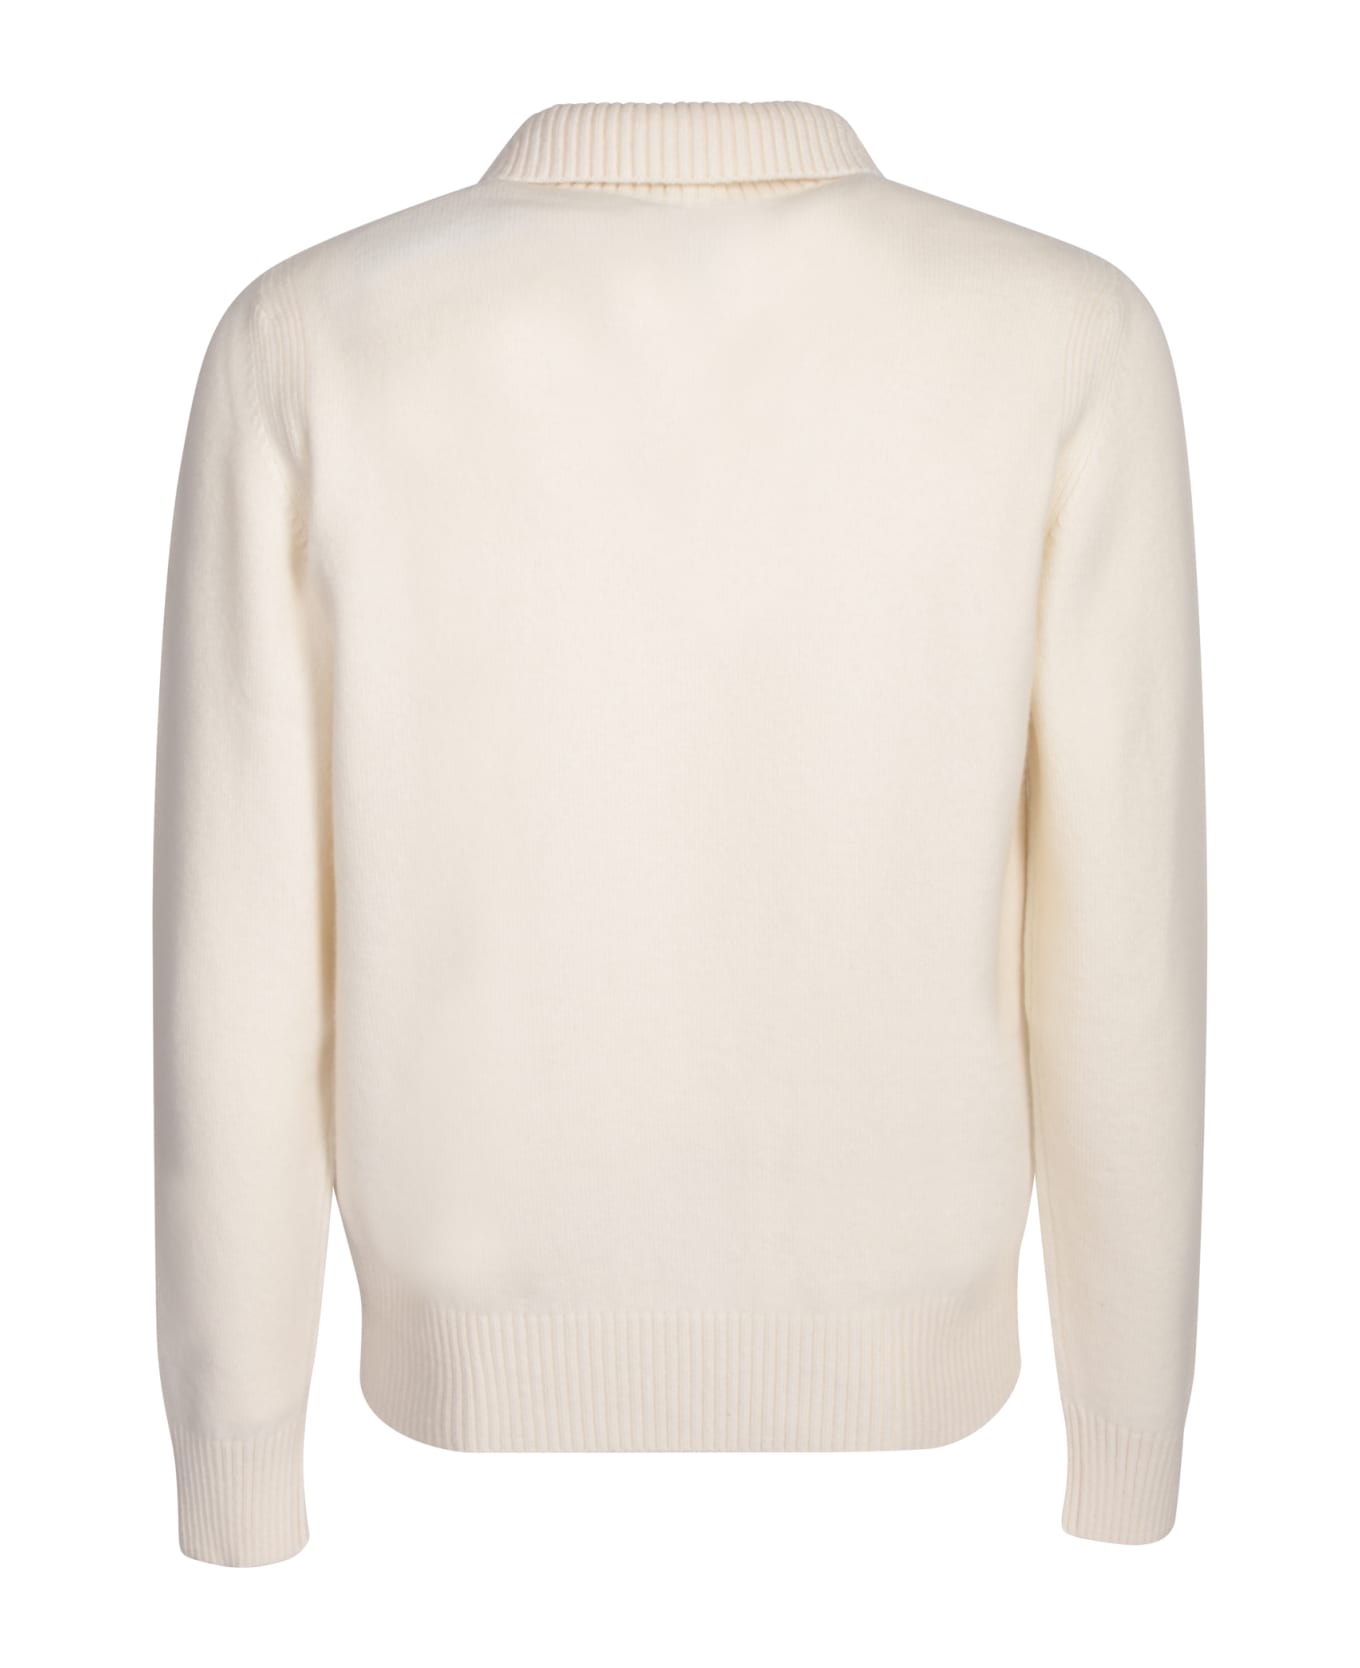 Tom Ford White Long-sleeve Sweater With Zip-up Mock Neck In Wool And Cashmere Man - White ニットウェア